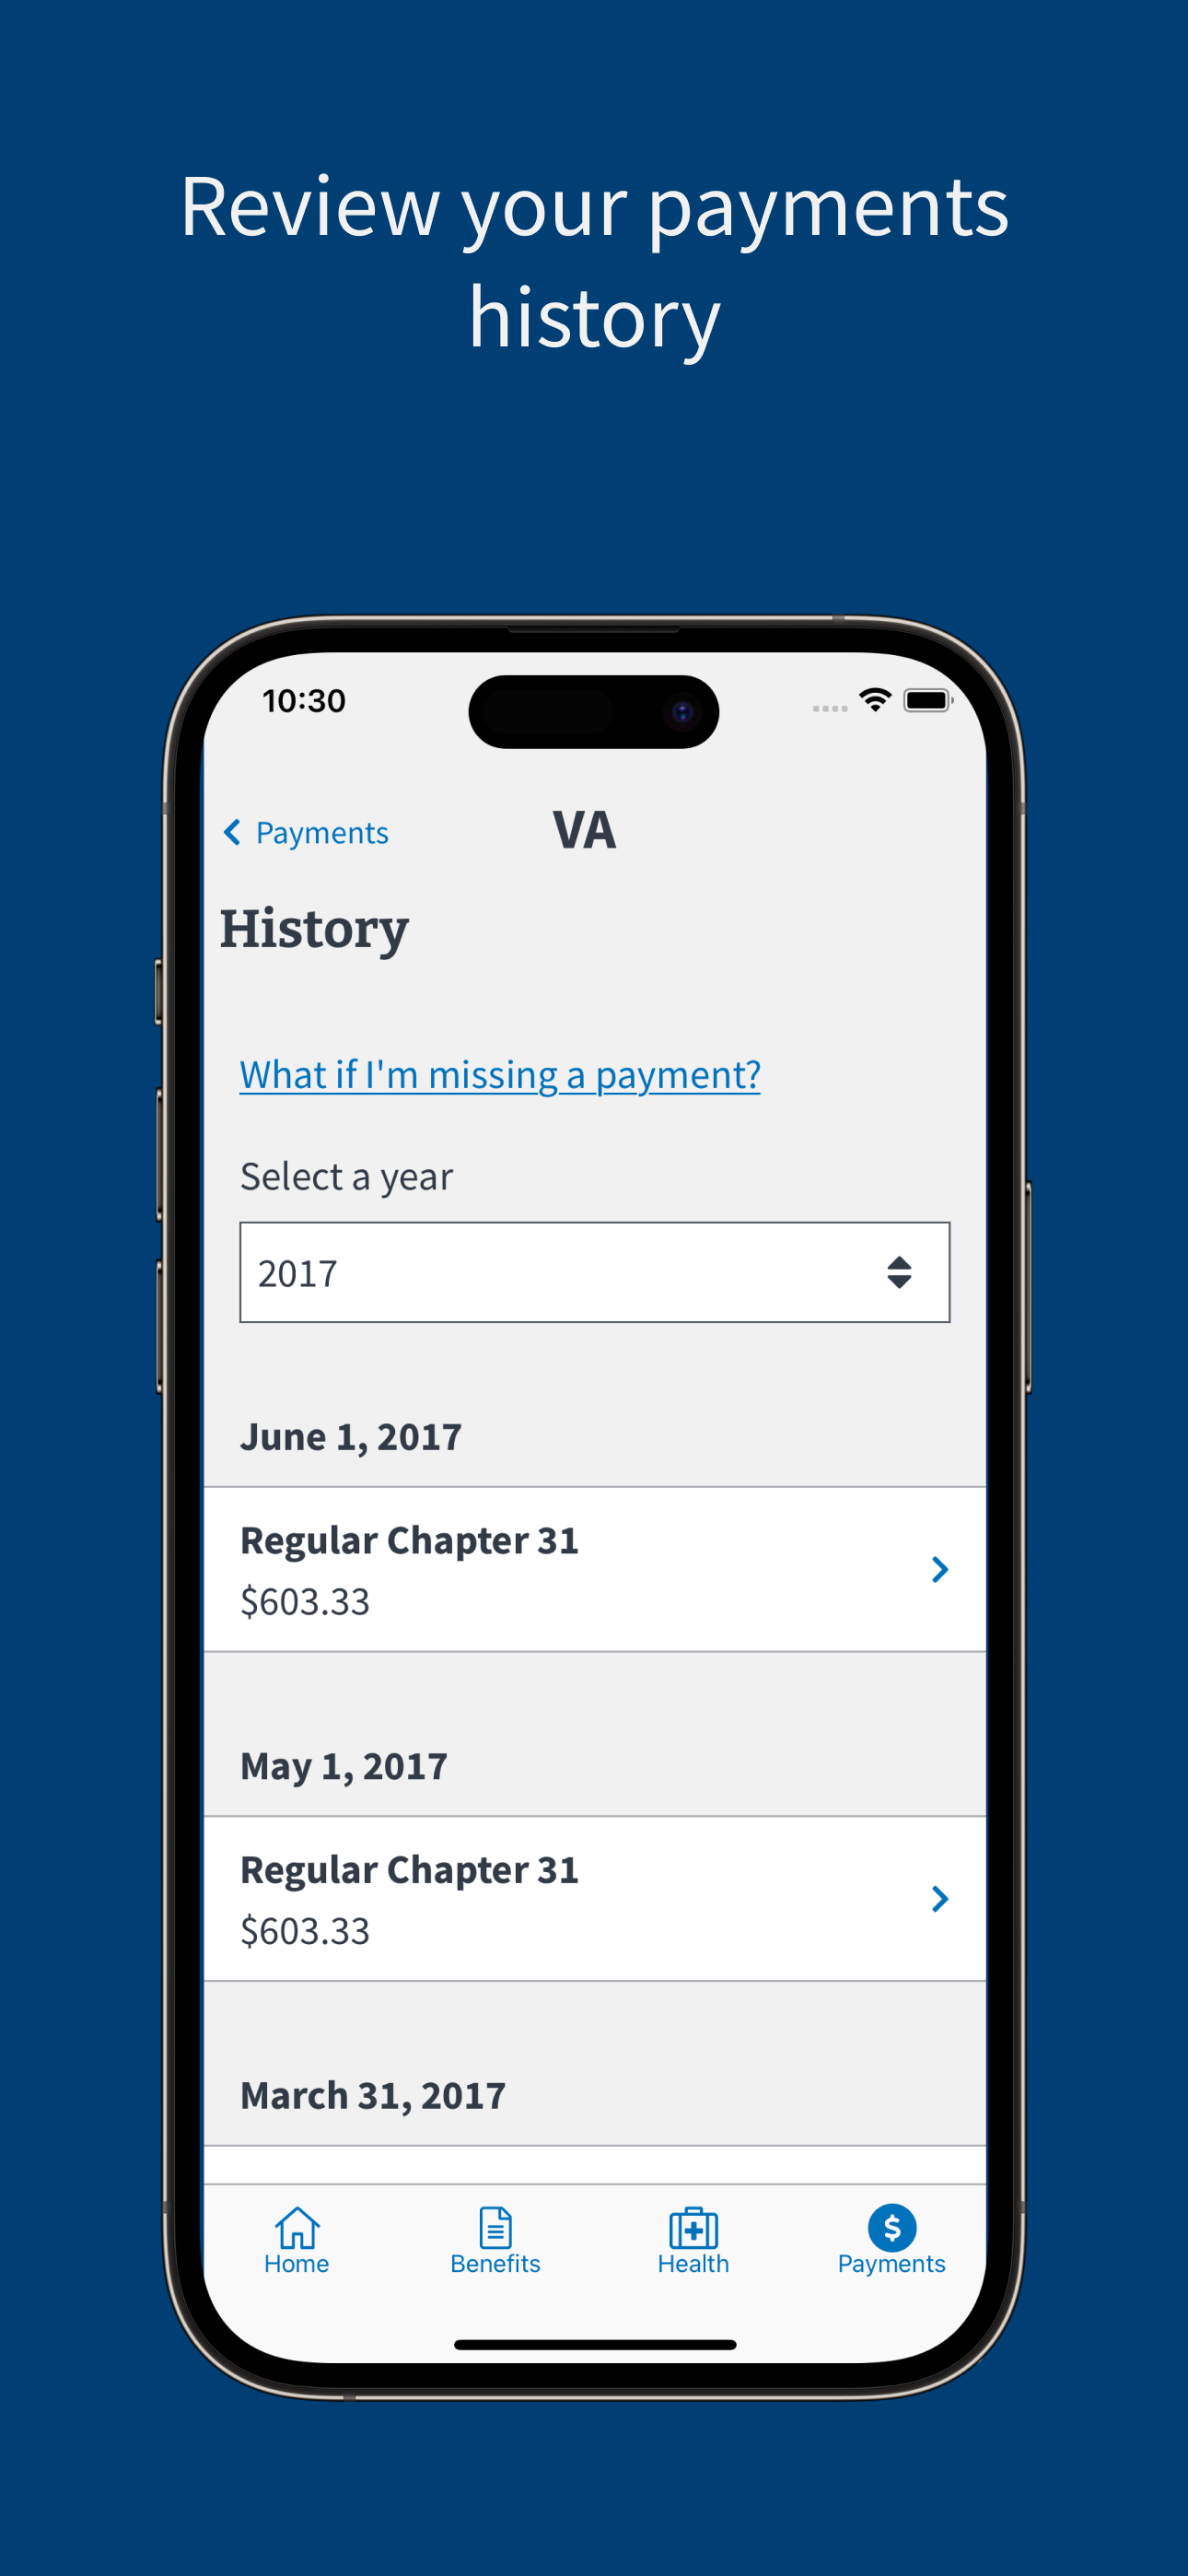 Review your payments history